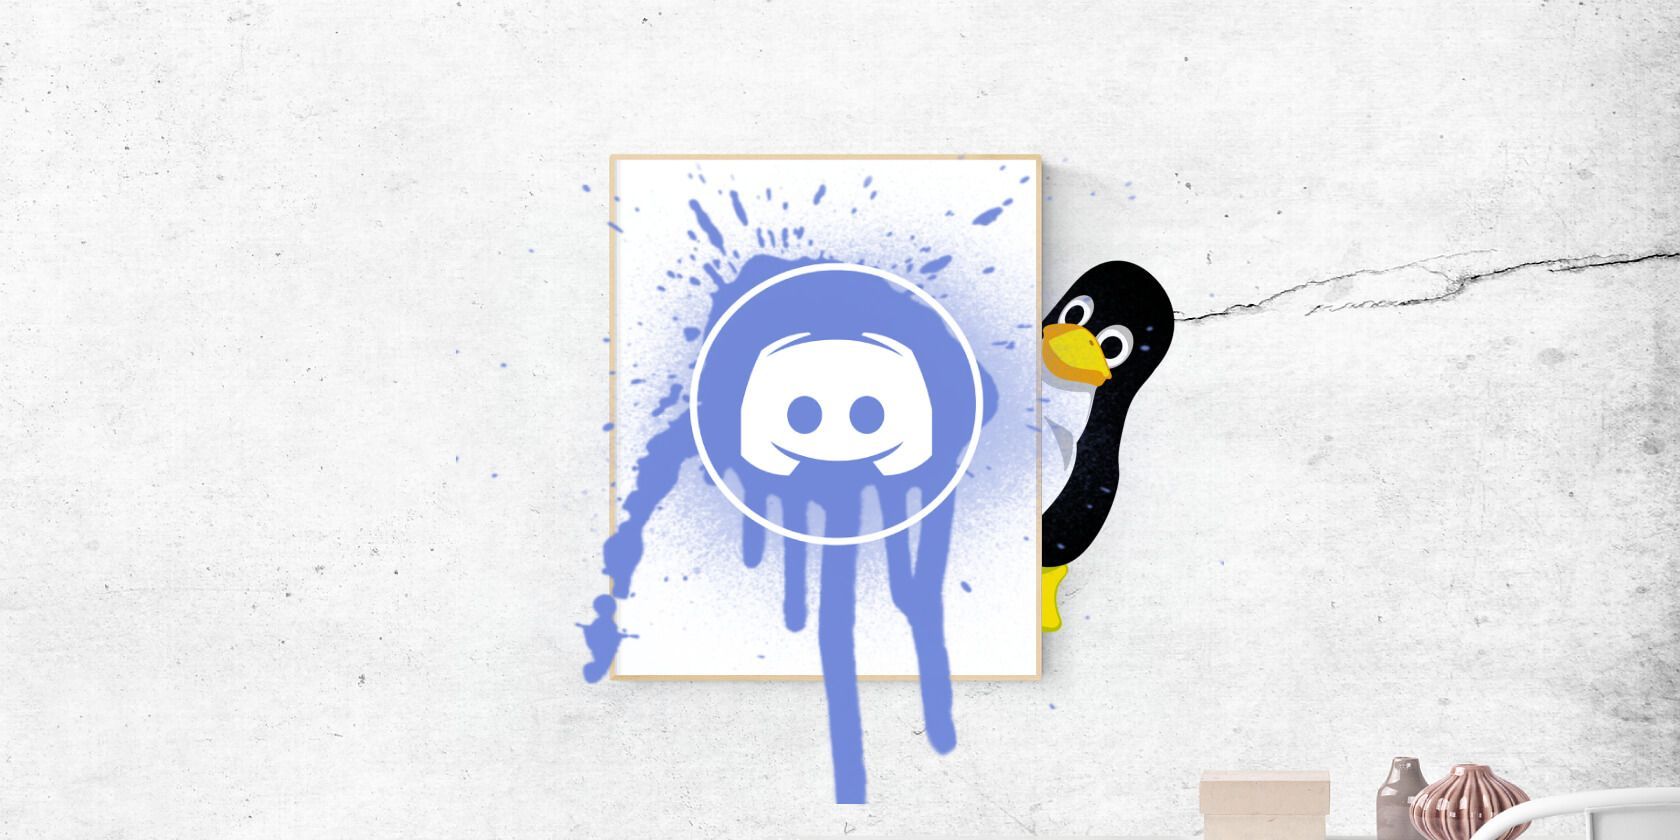 How to Install Discord in Linux - GeeksforGeeks